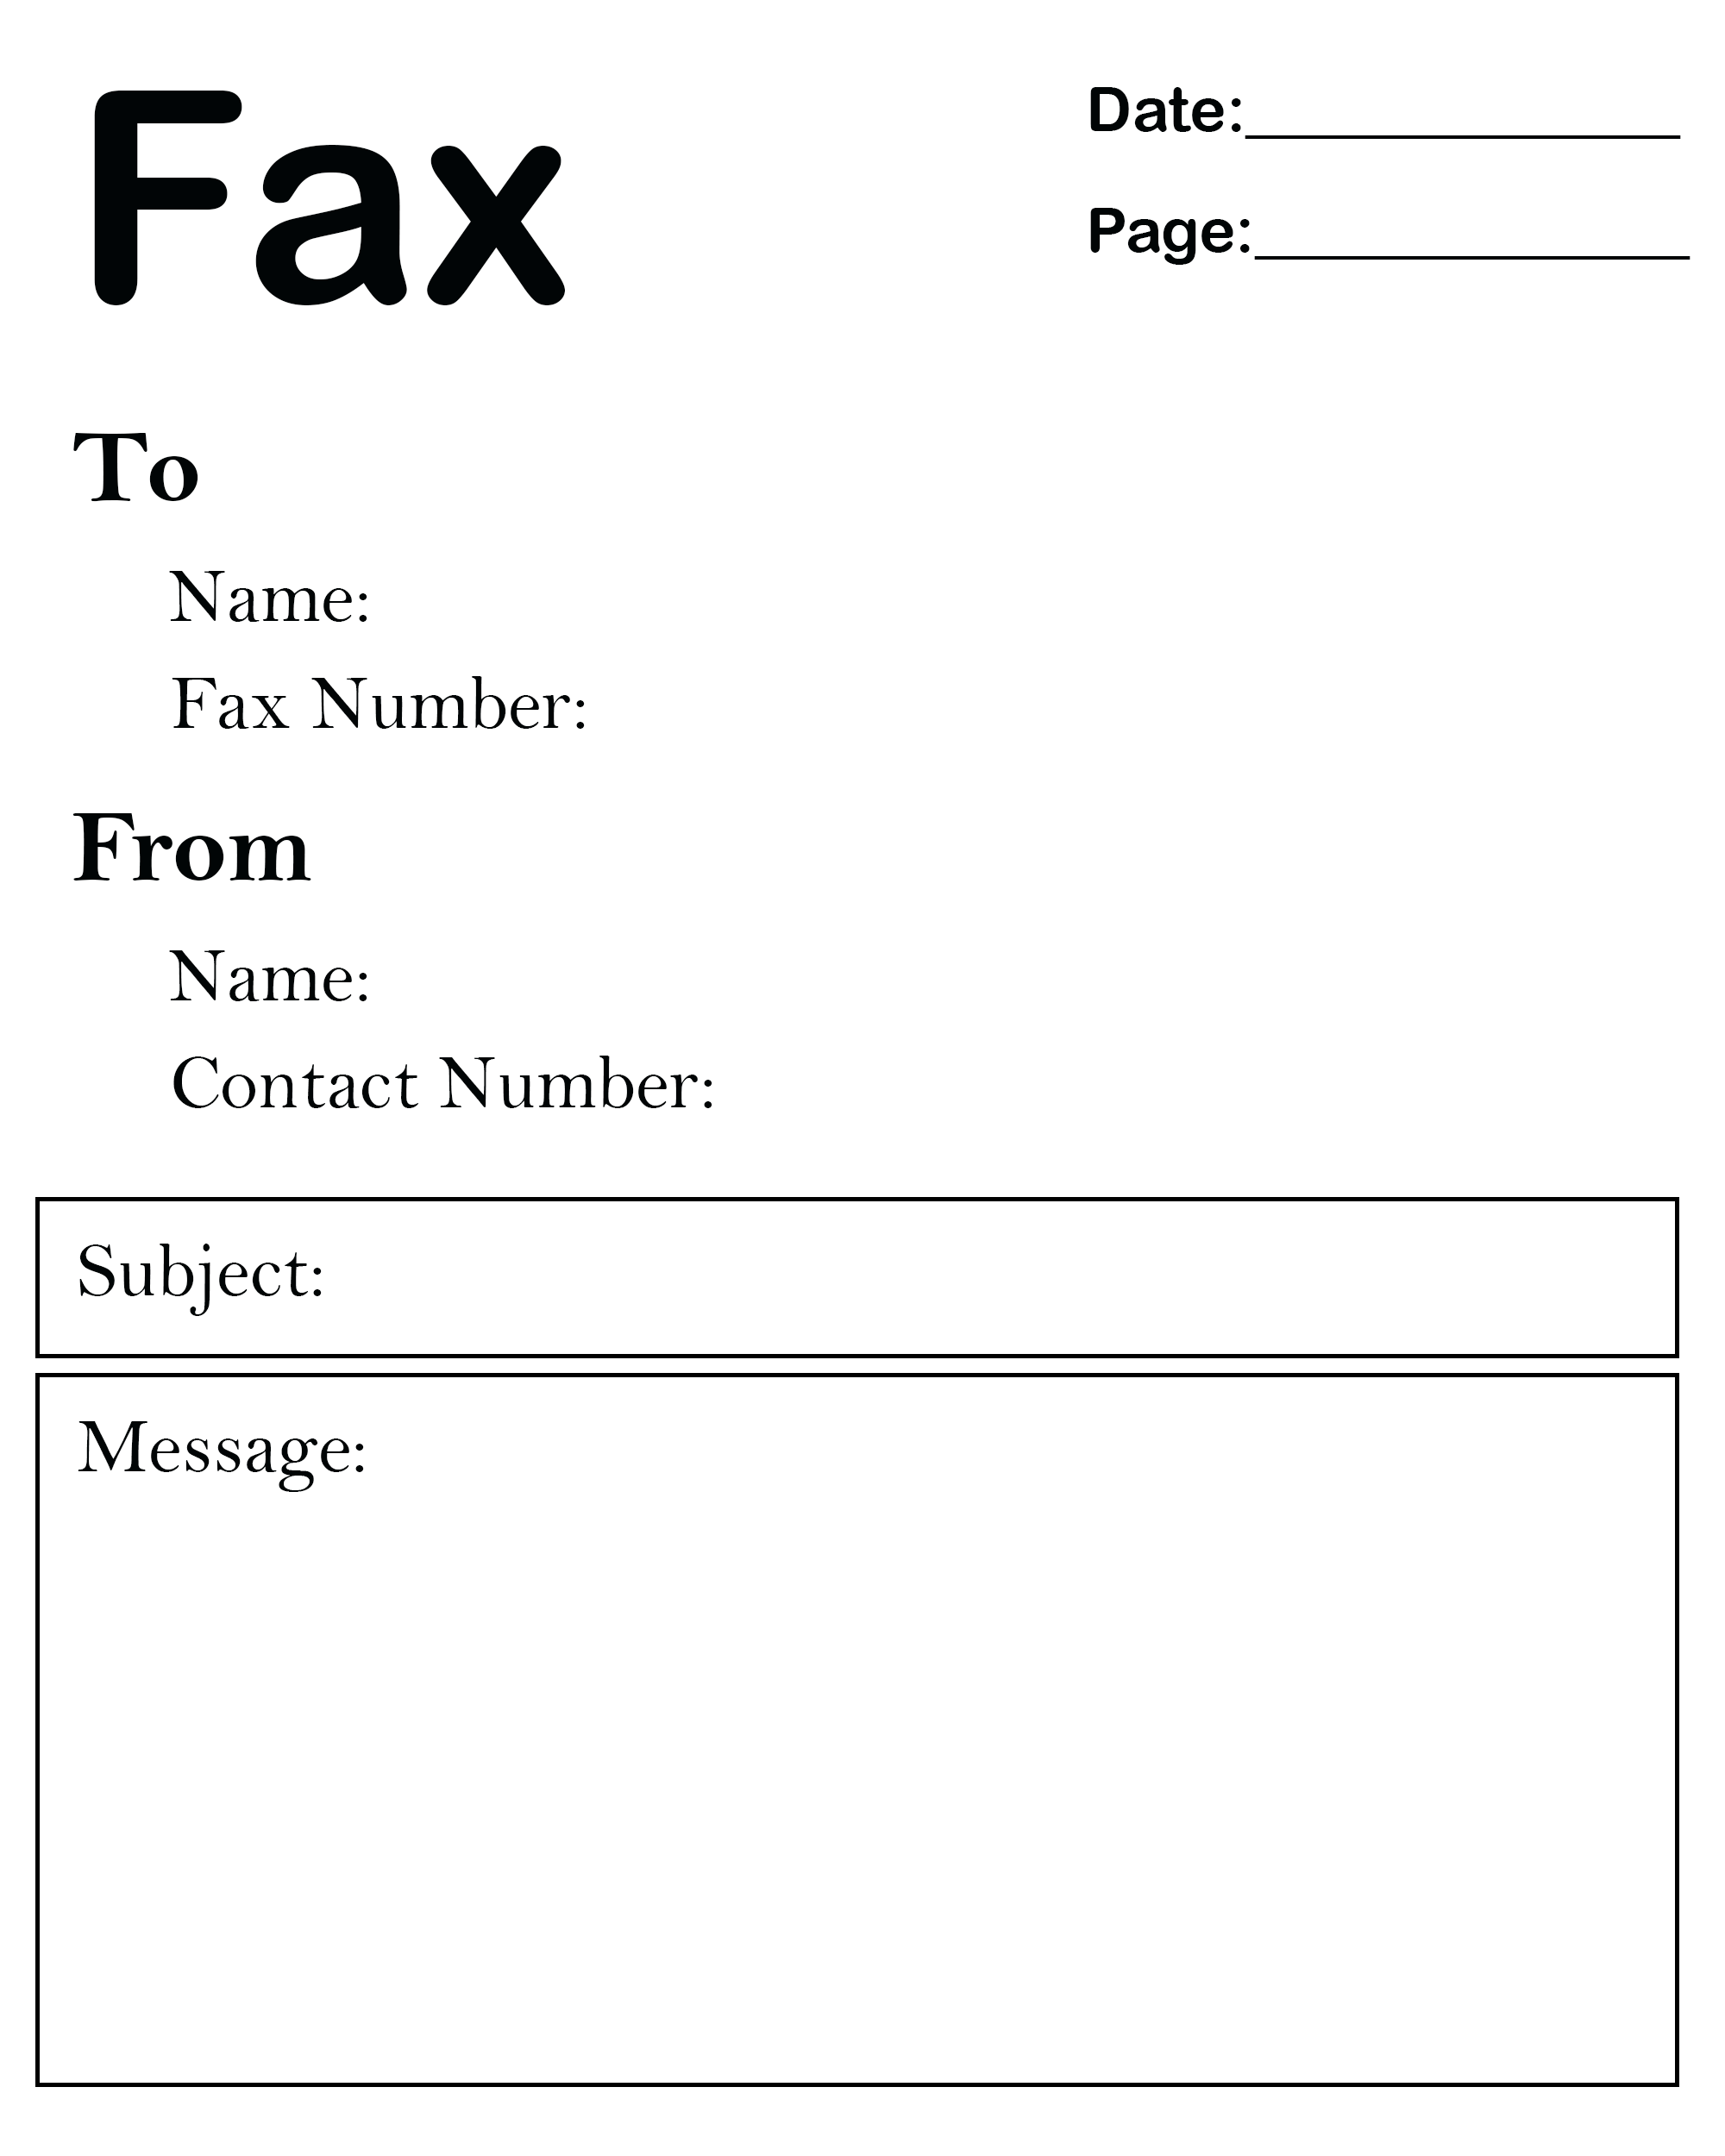 fax cover page download